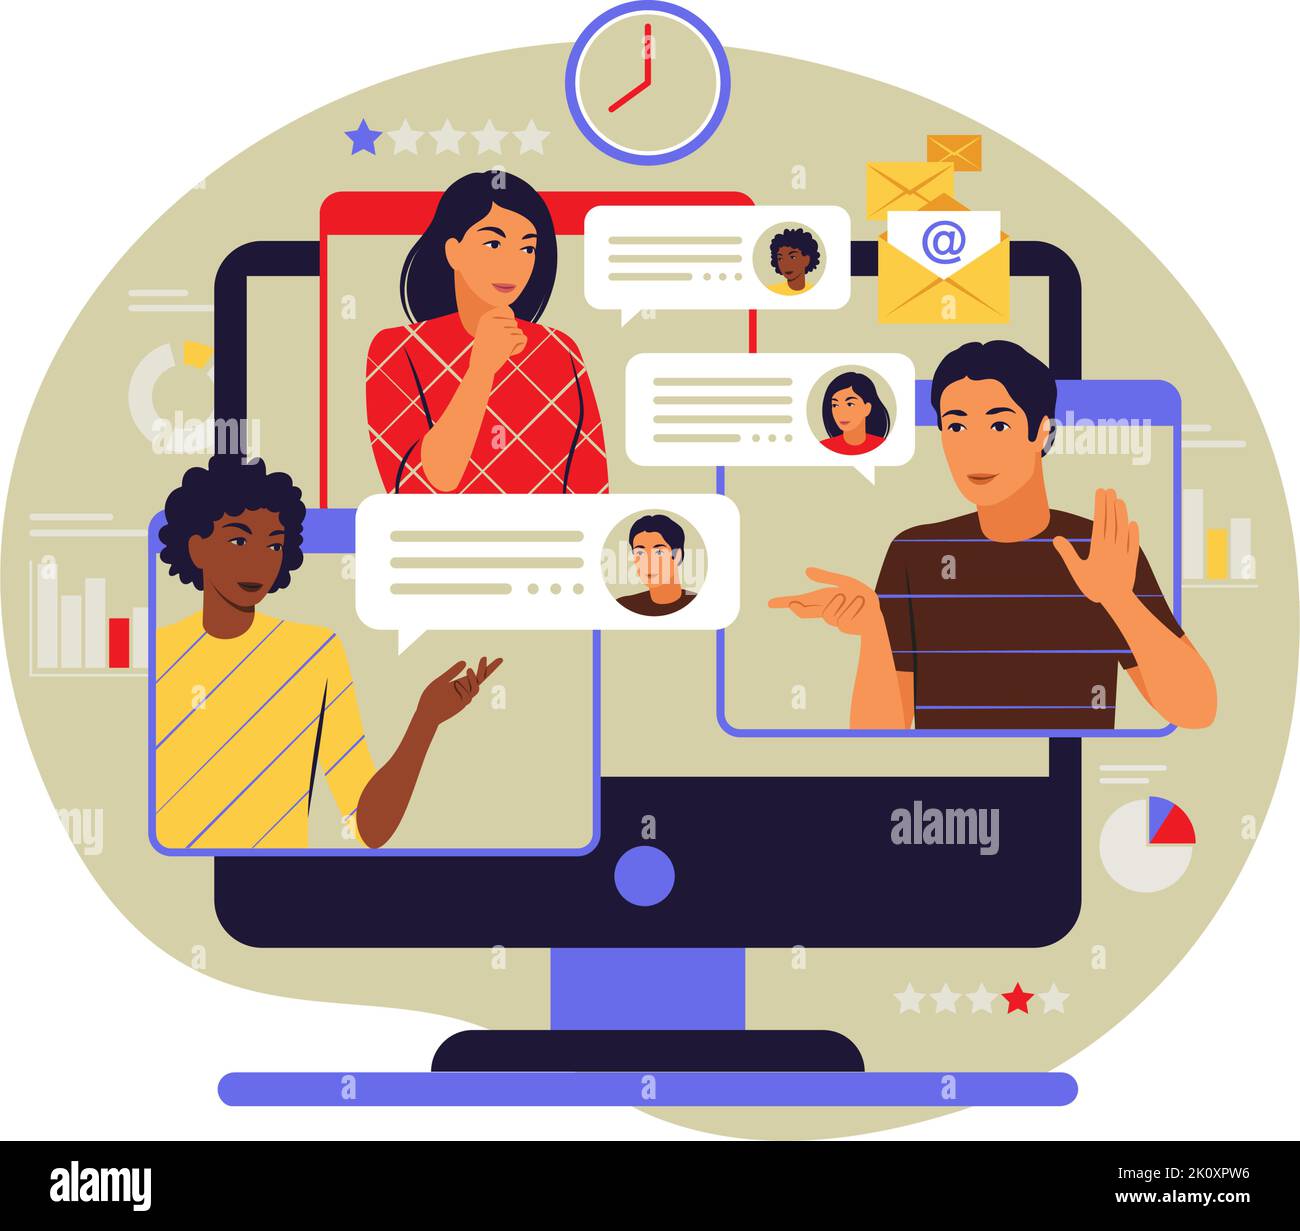 Telecommuting concept. Team discussing ideas through online meeting. Vector illustration. Flat. Stock Vector